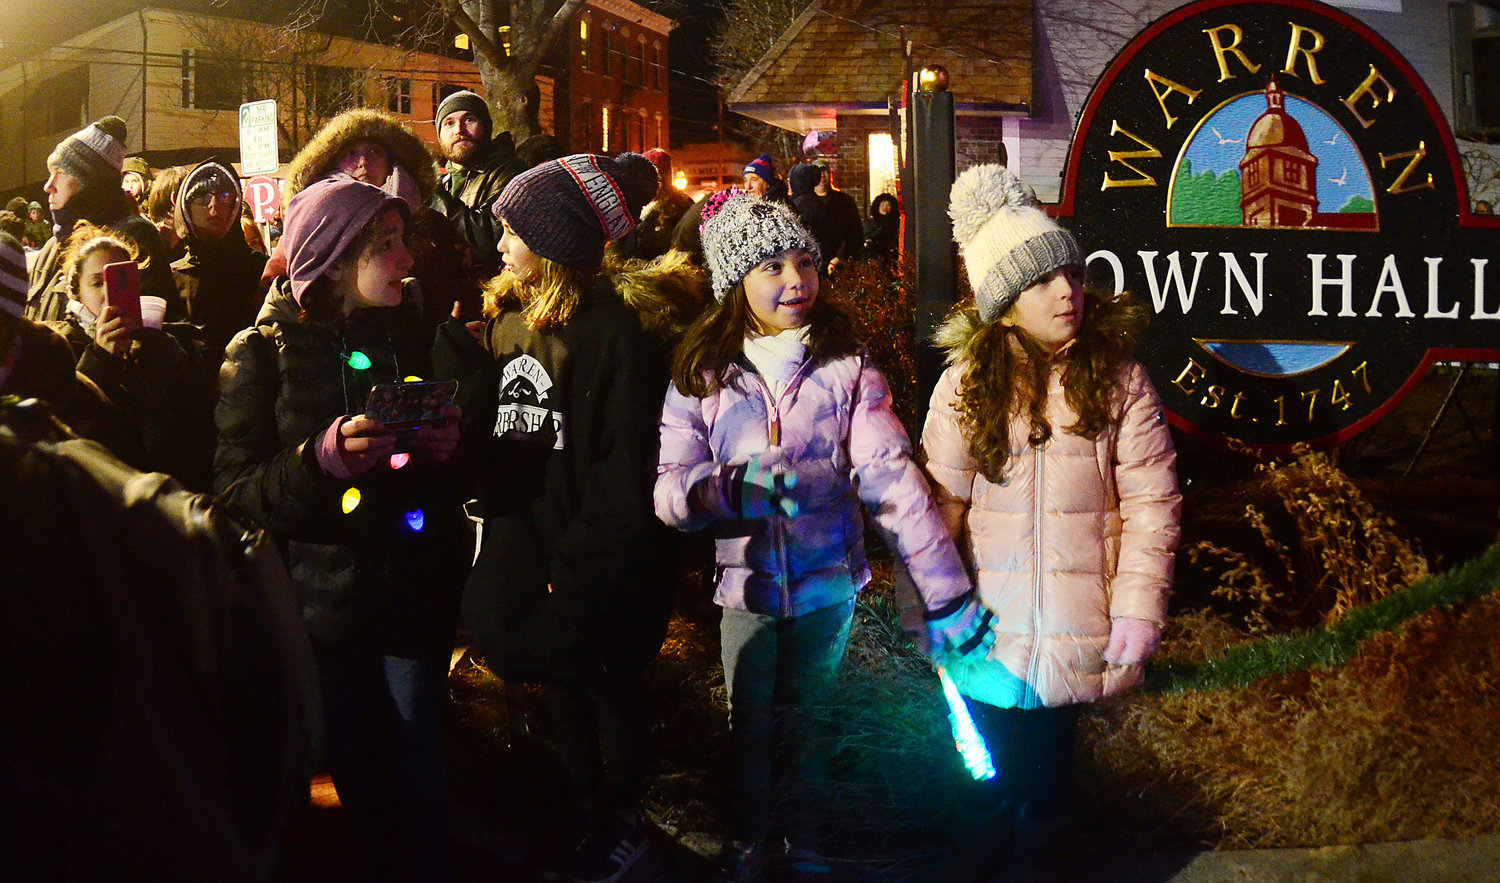 Children near Town Hall on Main Street excitedly await the lights to turn on during last year’s festival.